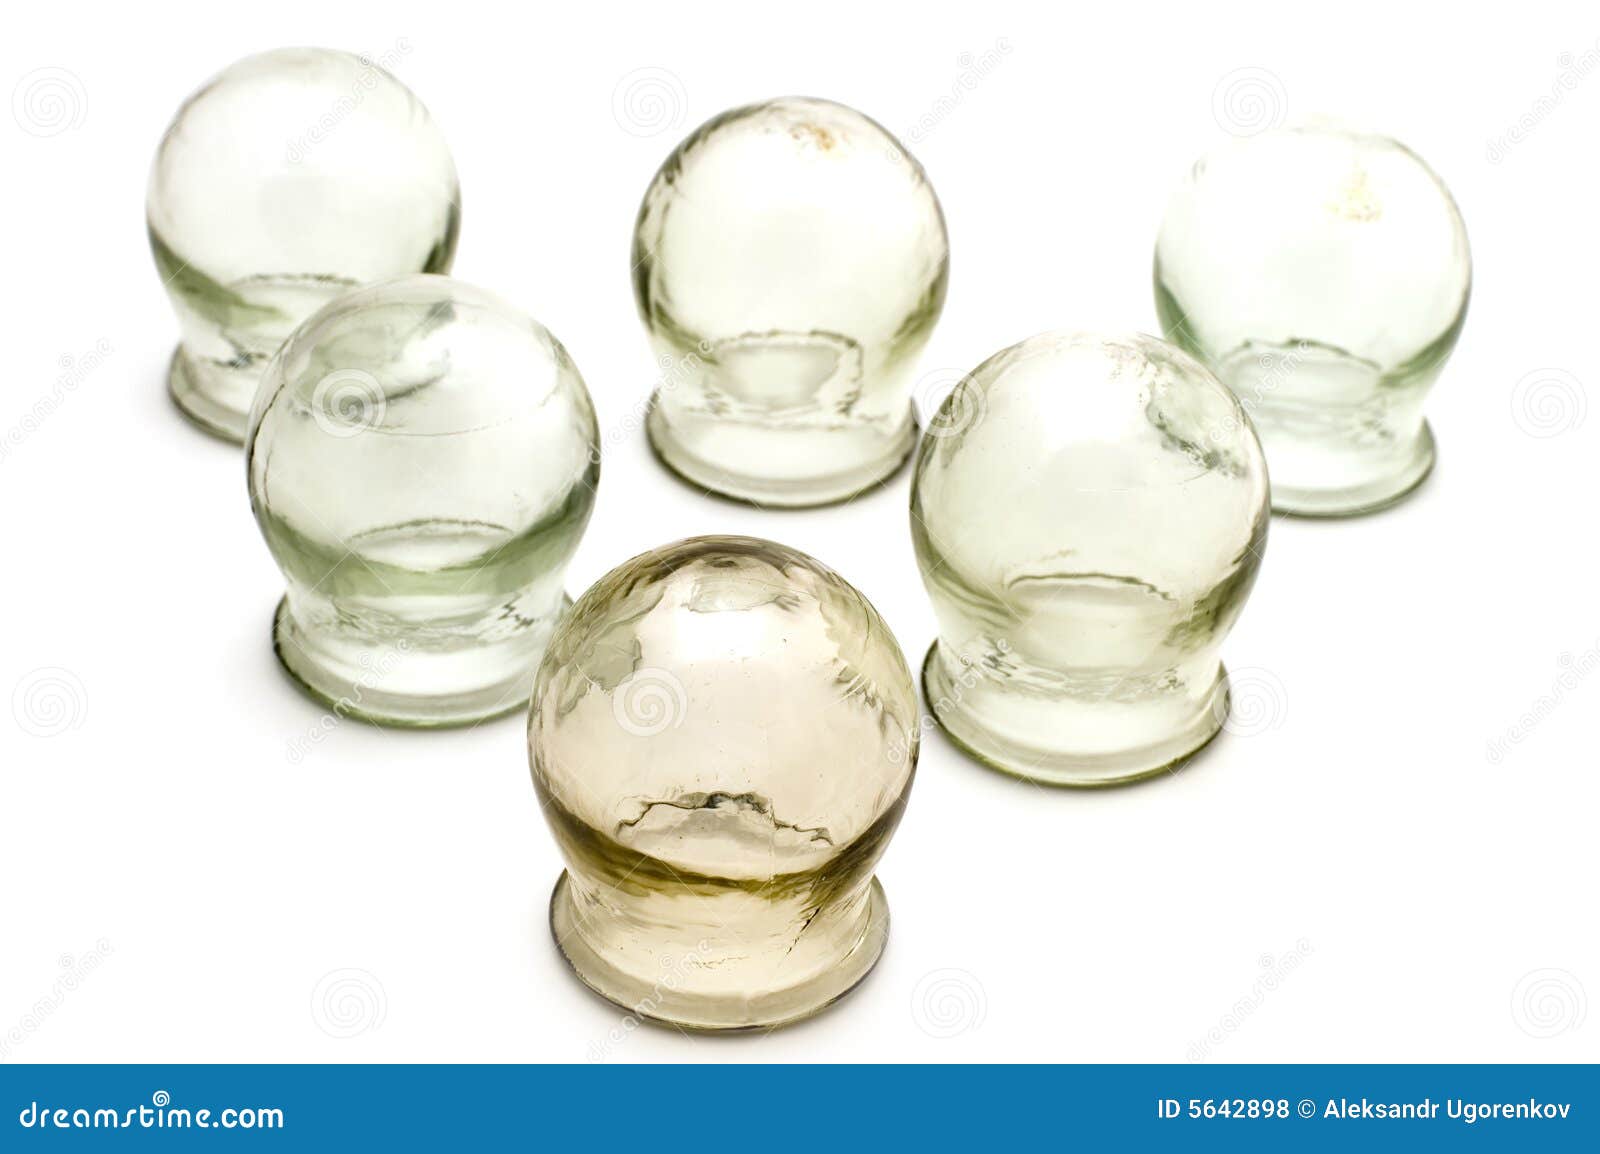 cupping glass